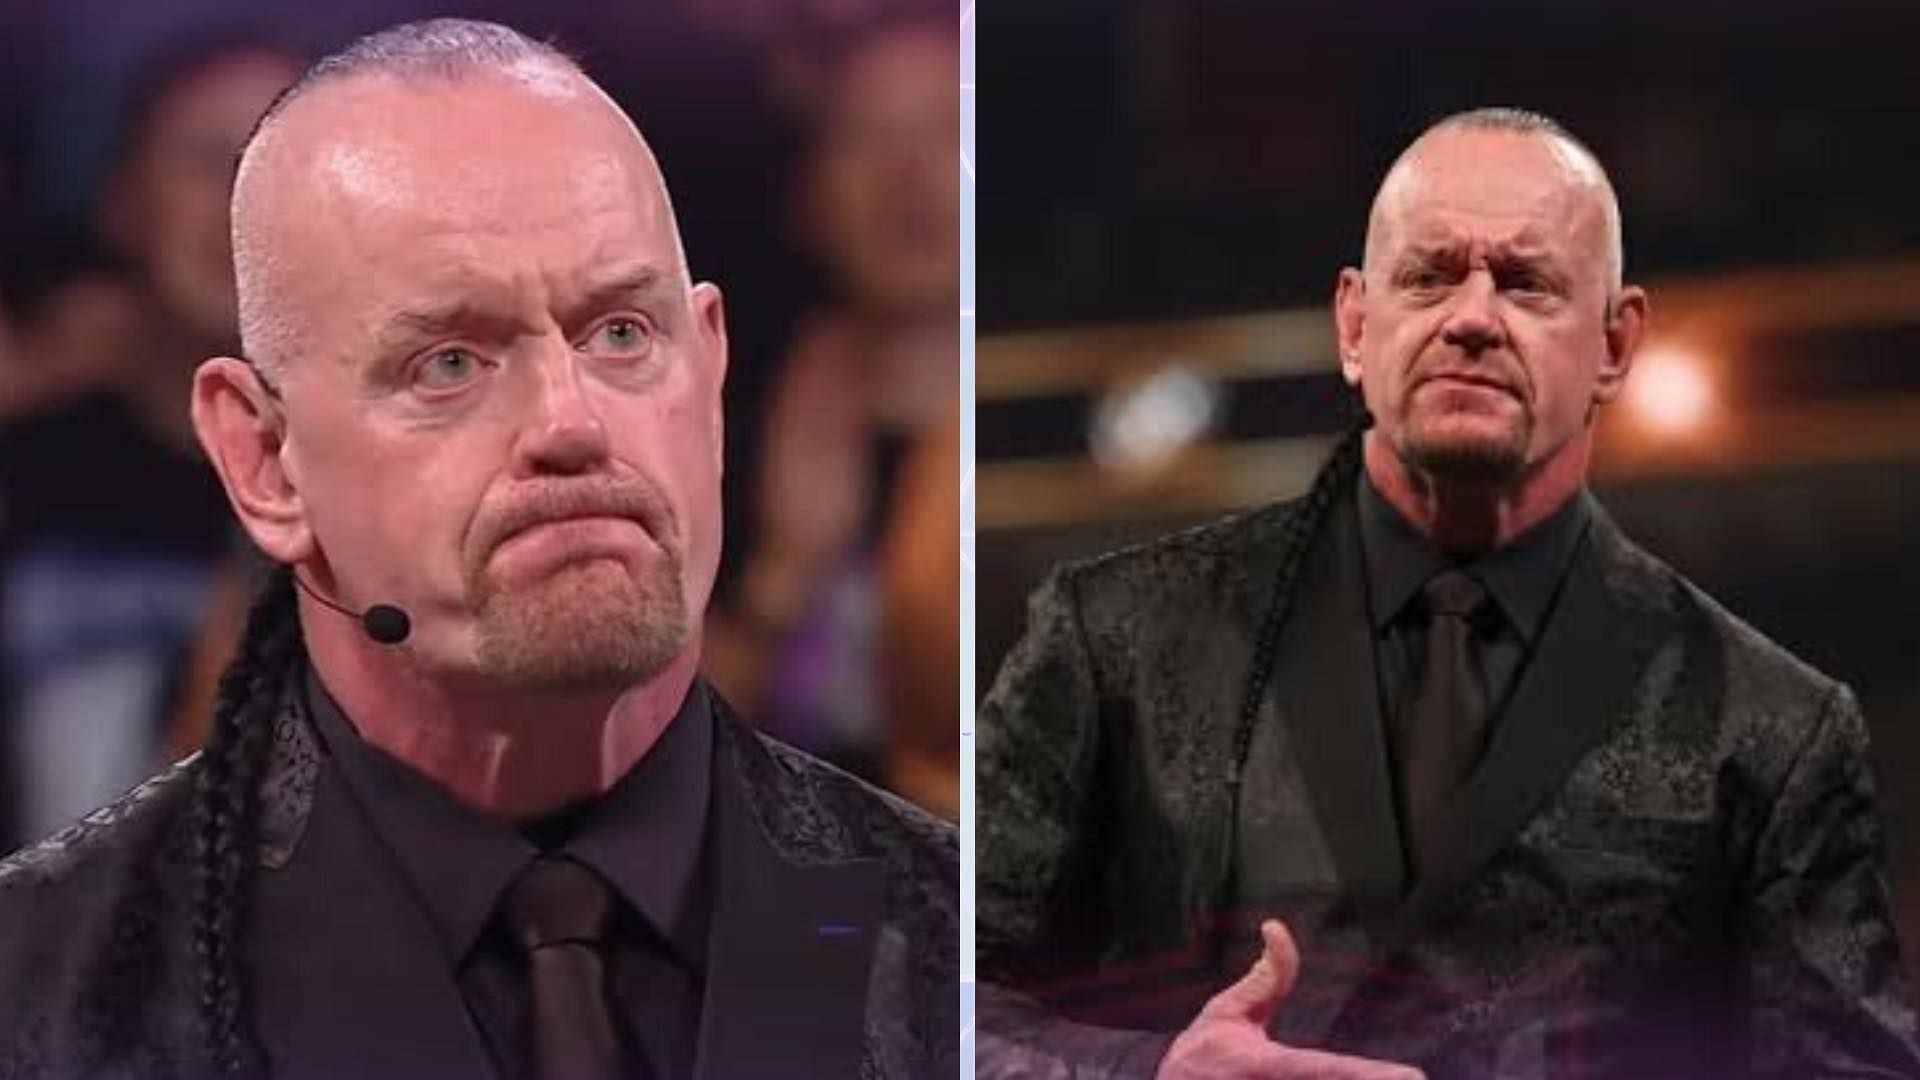 The Undertaker shared emotional words about his retirement match in WWE.